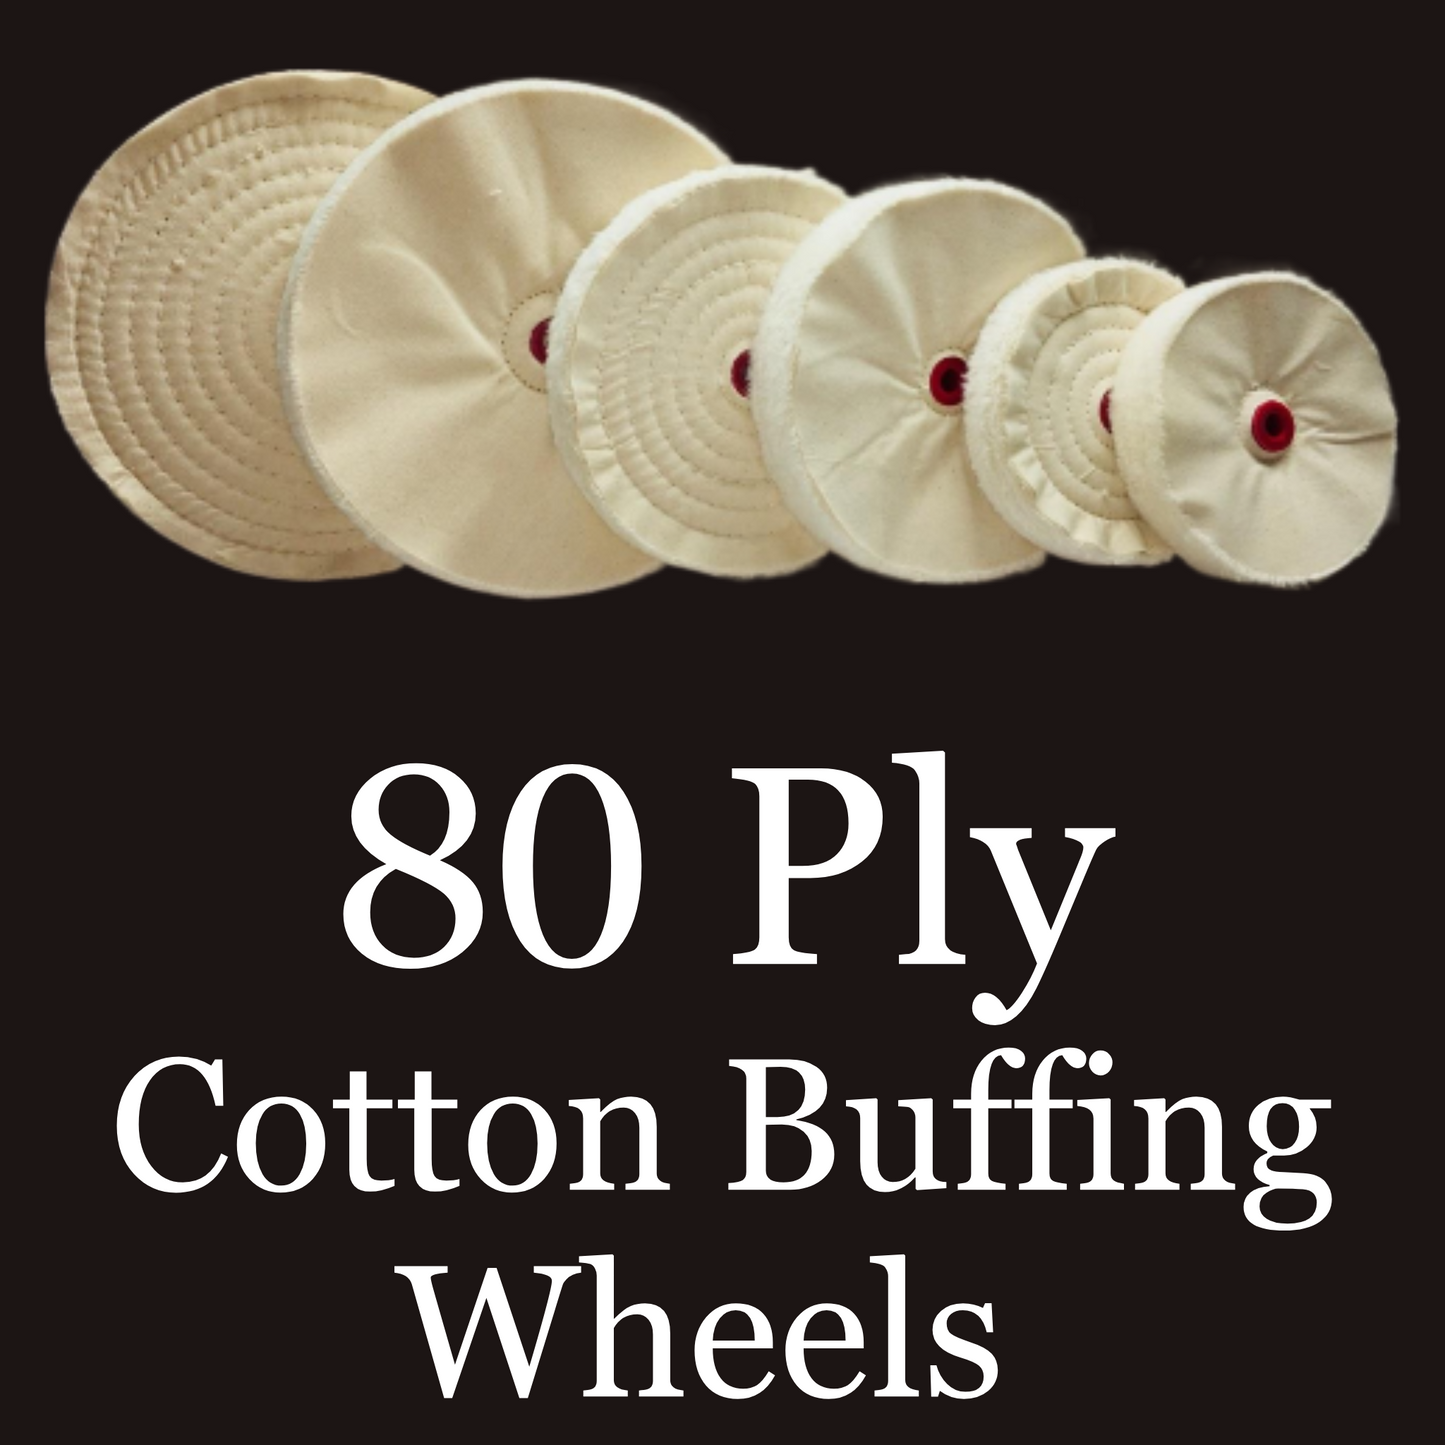 Spiral Sewn Cotton Buffing Wheels 80 Ply